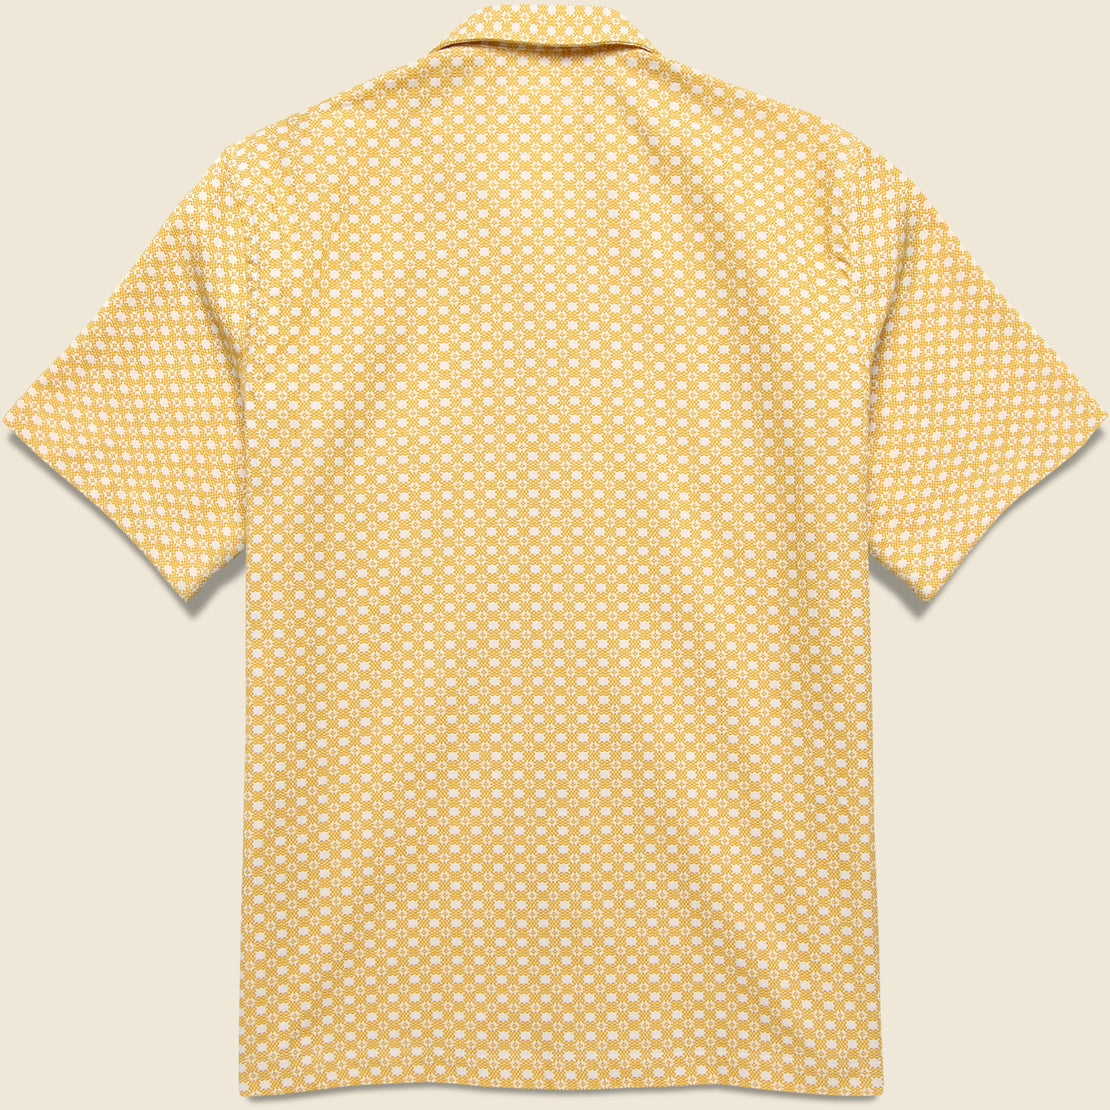 Tile Road Shirt - Yellow/White - Universal Works - STAG Provisions - Tops - S/S Woven - Other Pattern